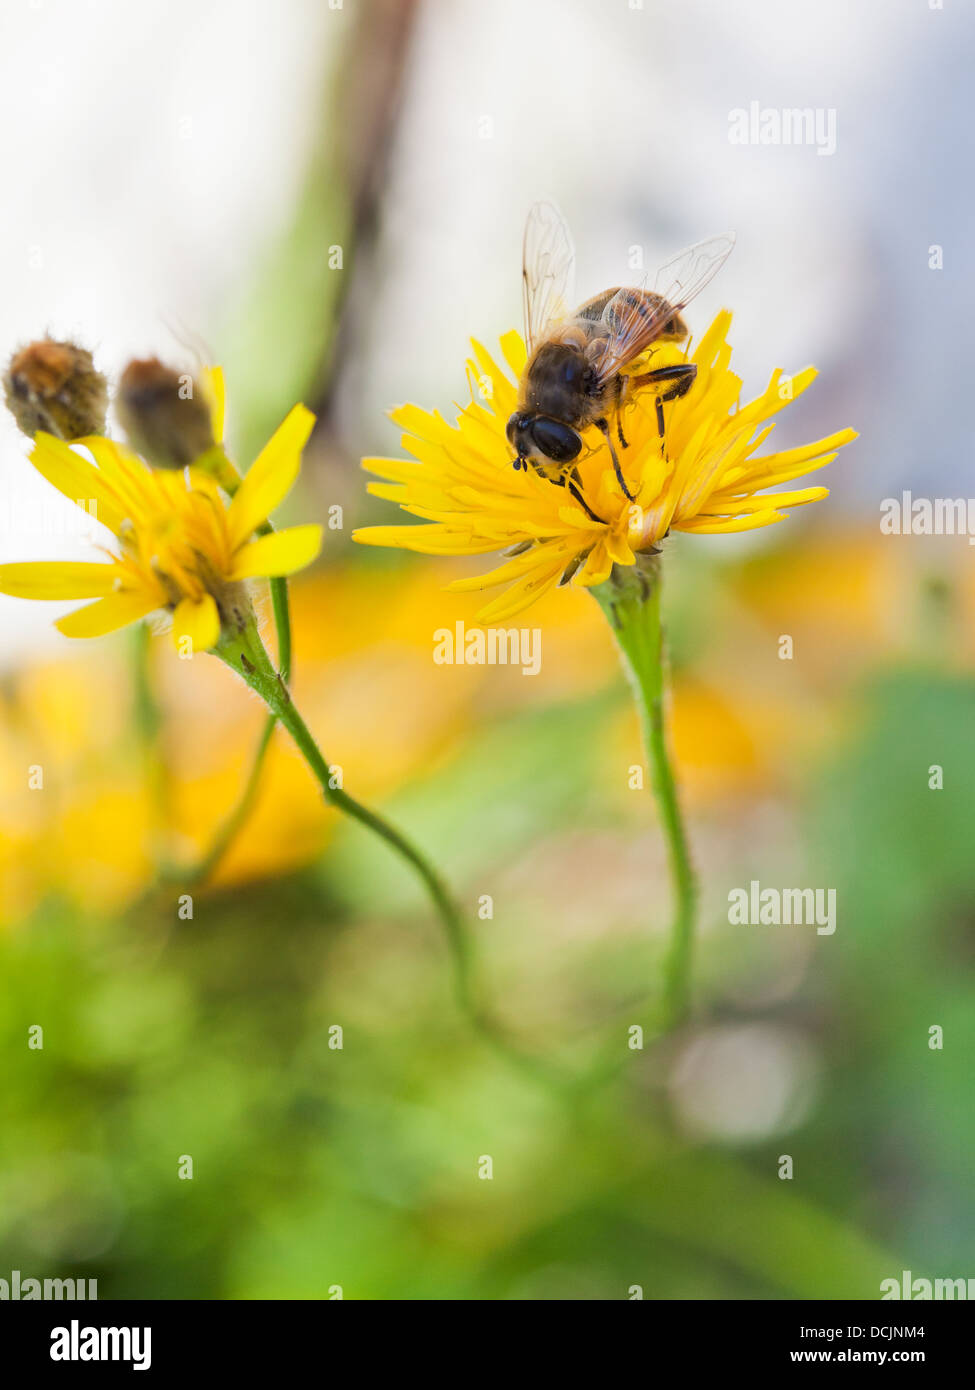 honey bee feed pollen from yellow flower of close up Stock Photo